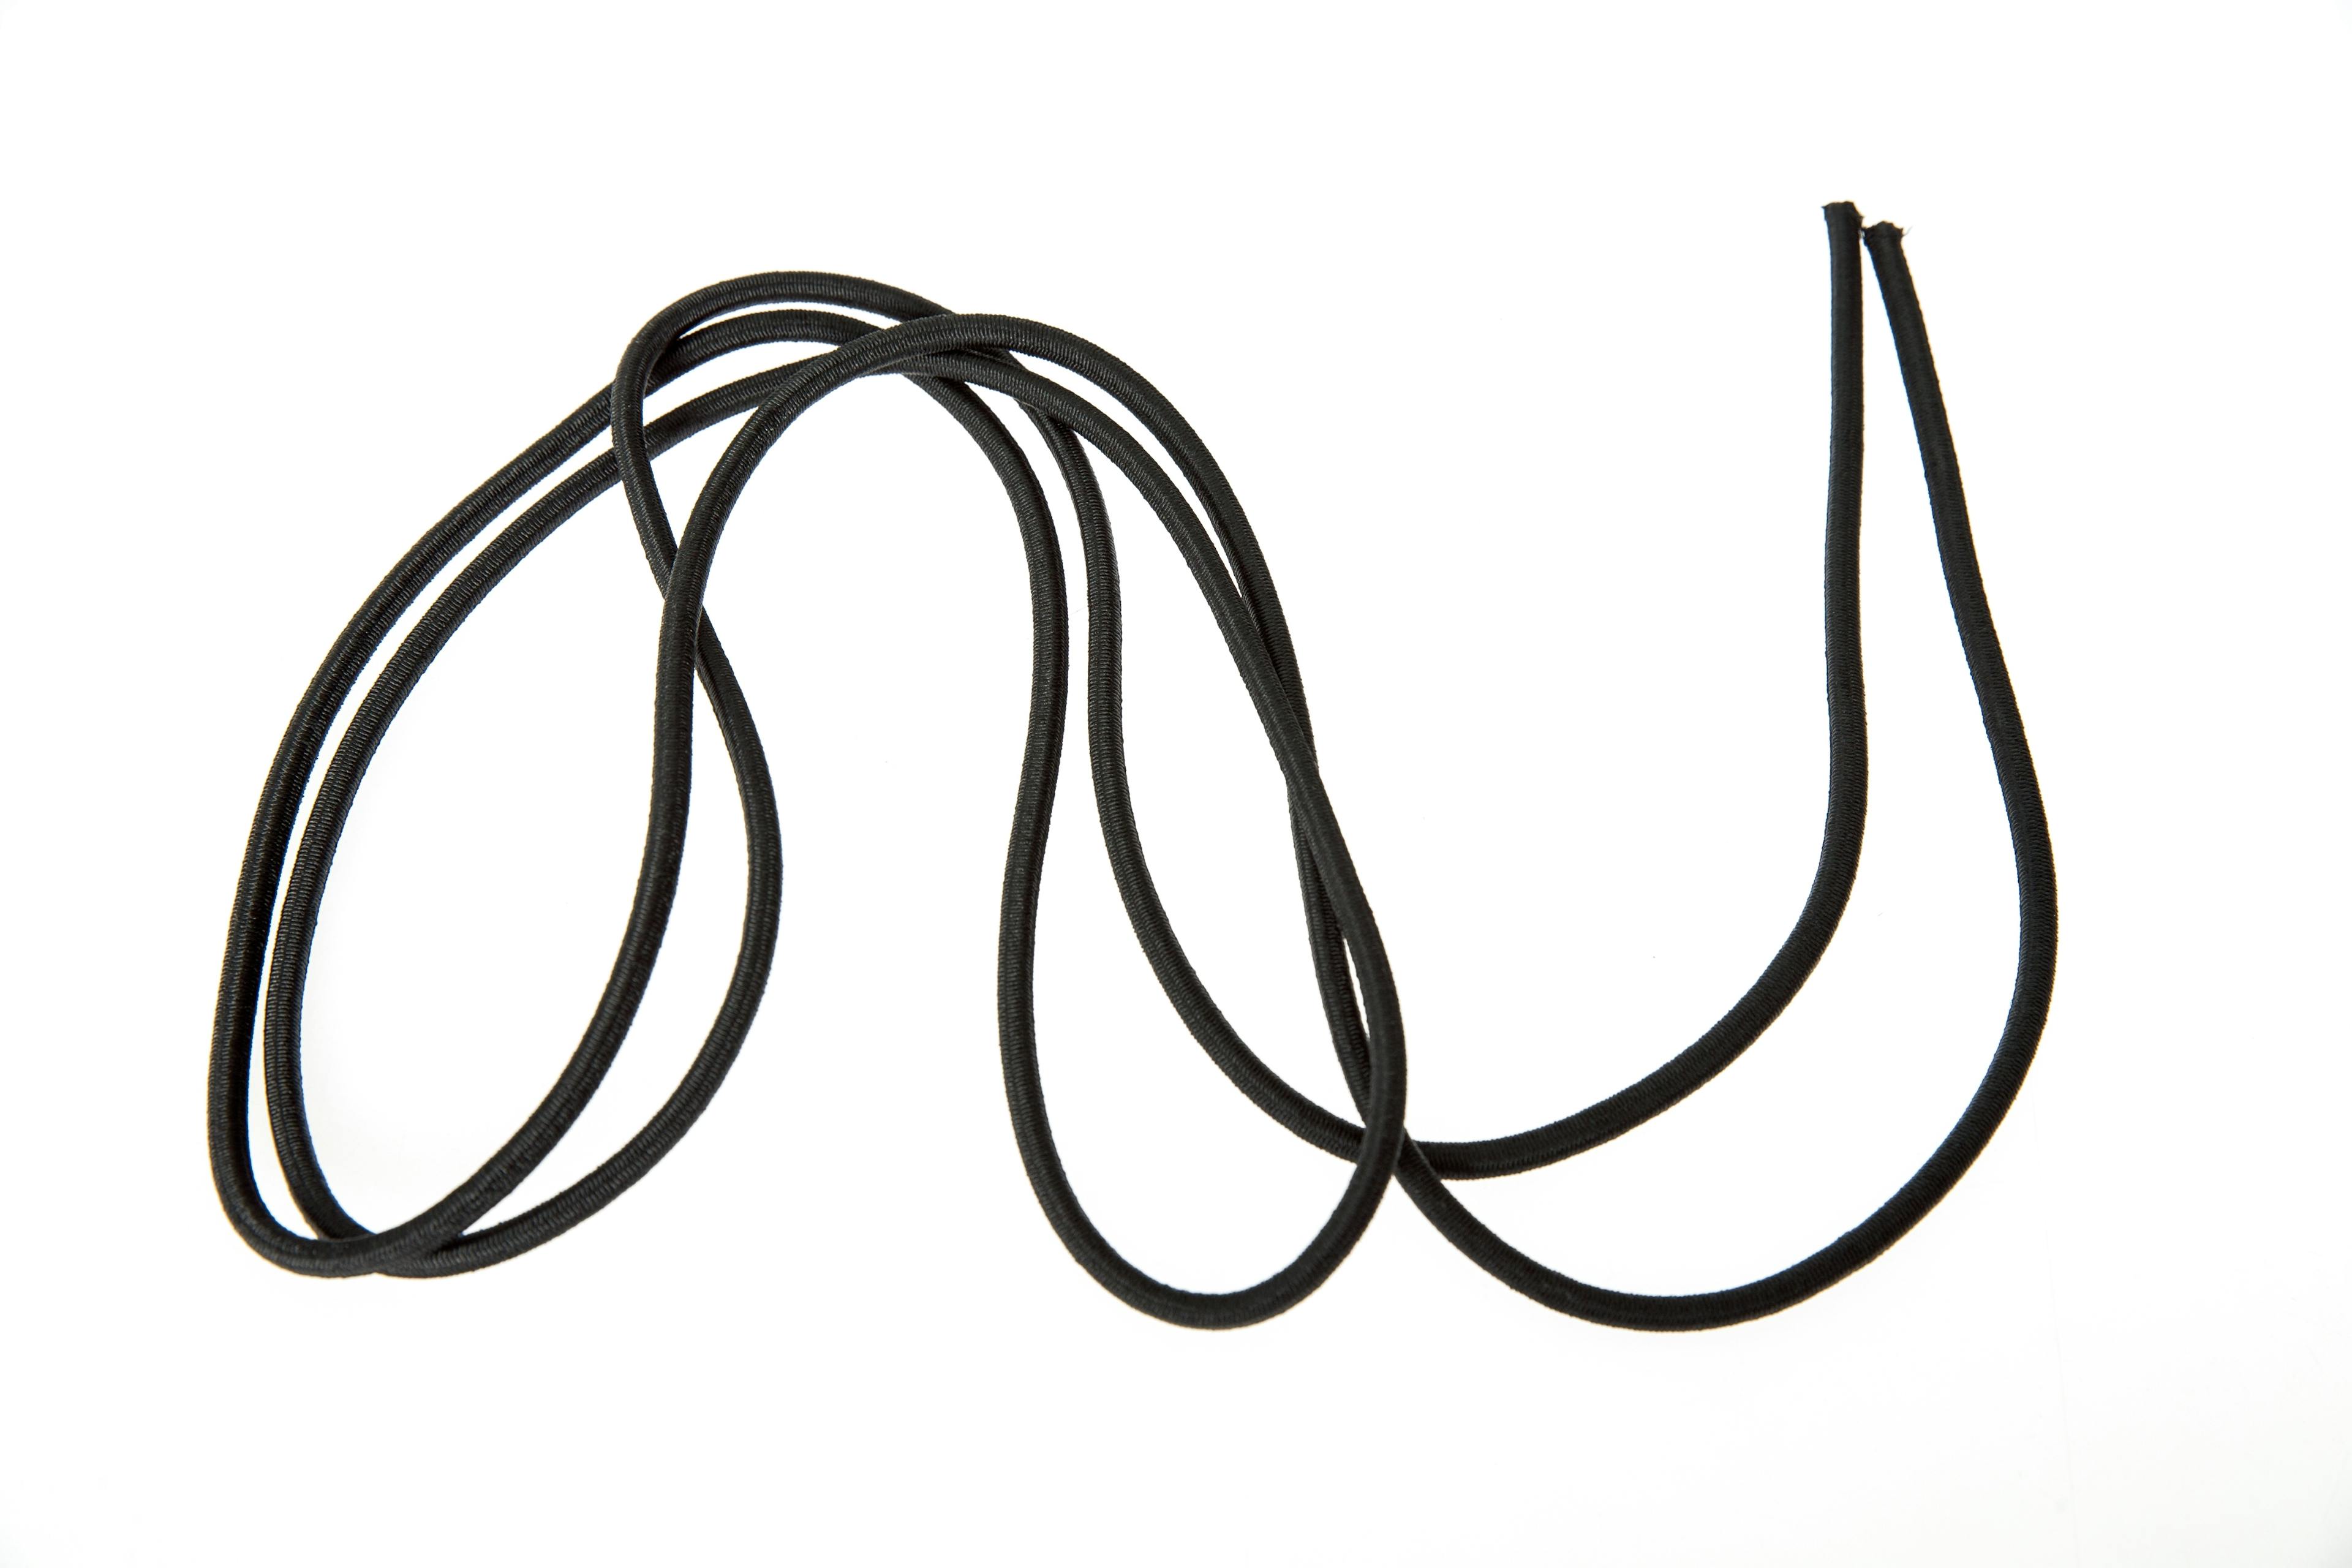 5# 2.3m Elastic Cord for Freesout Tech